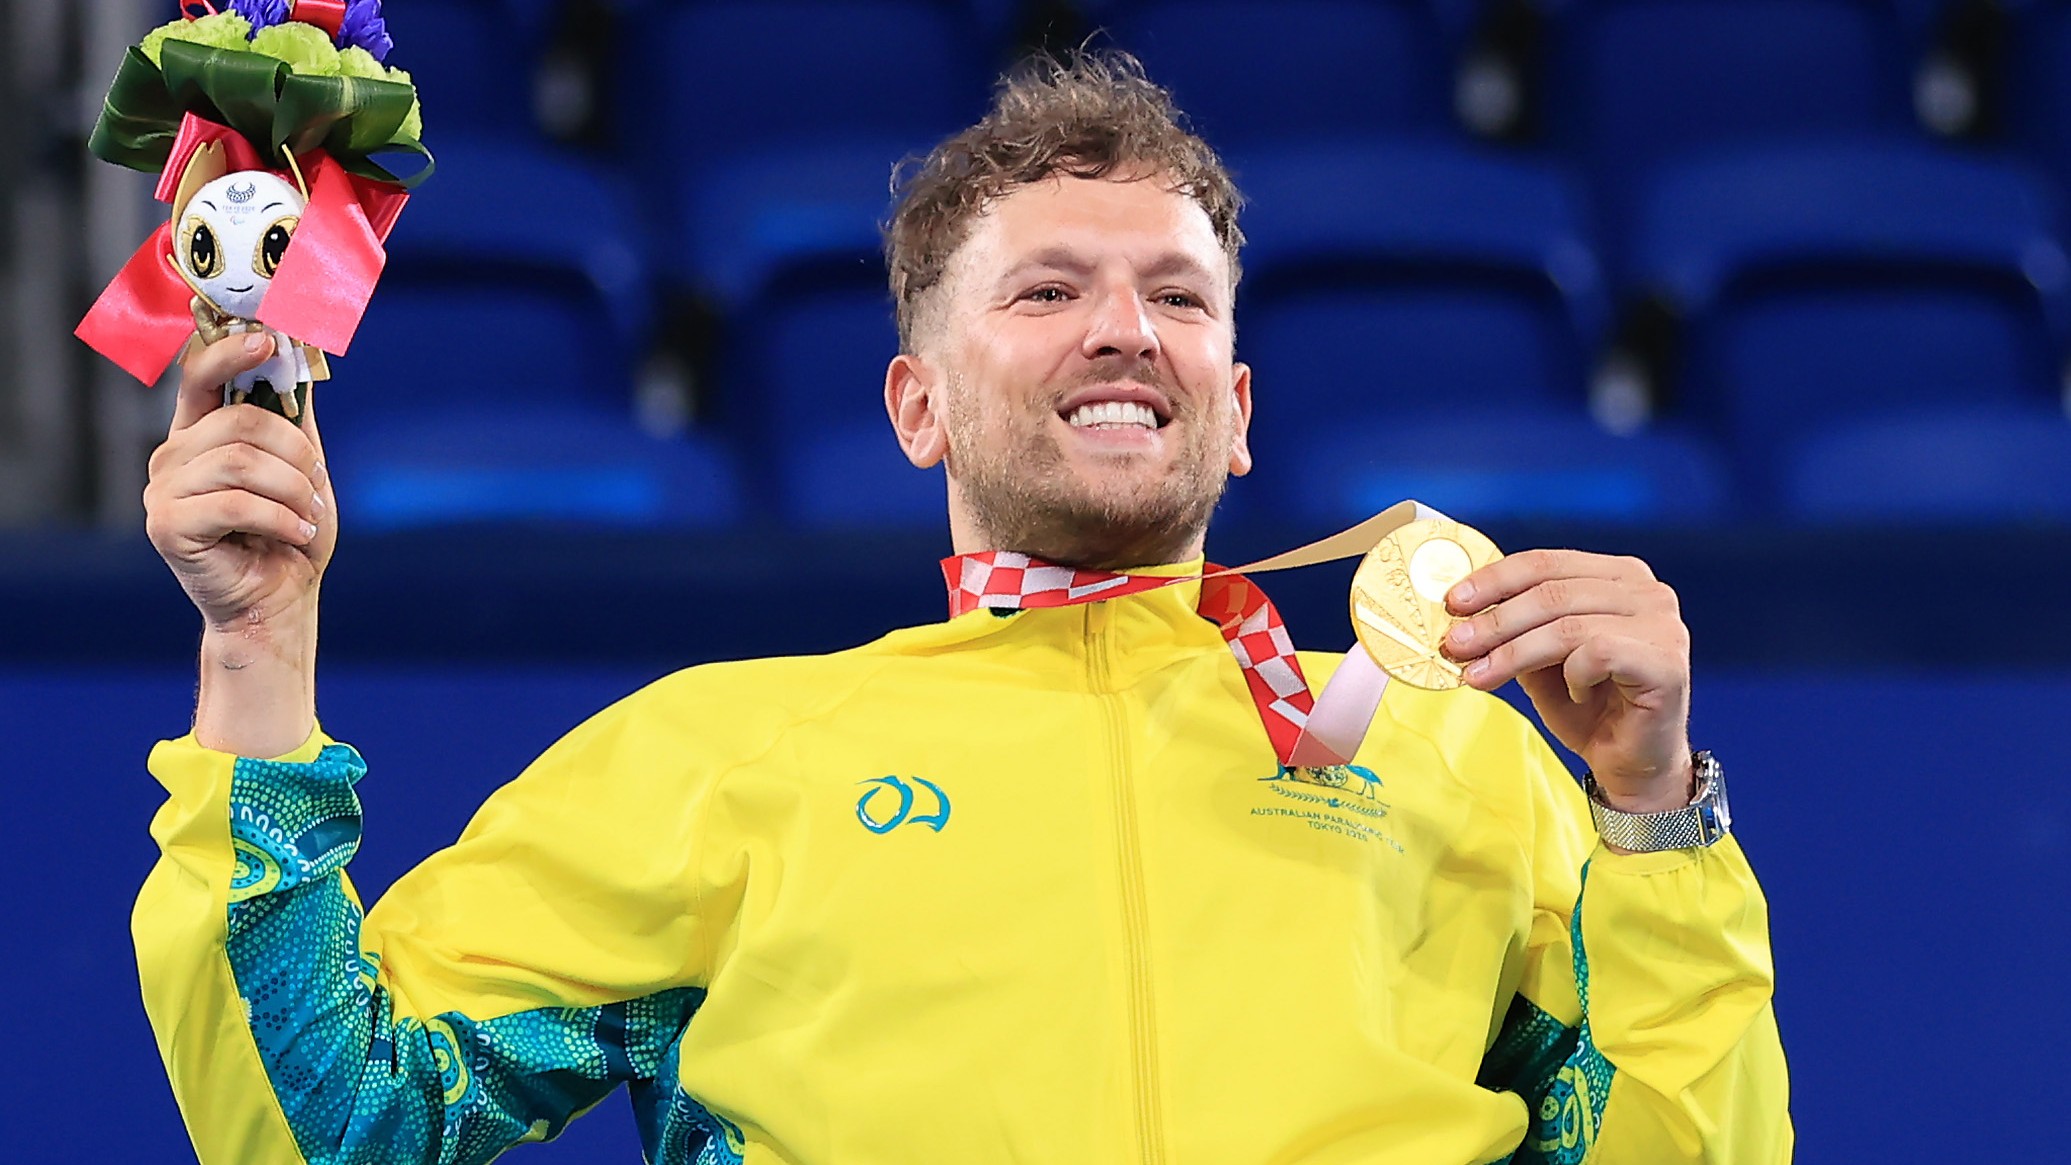 Dylan Alcott Australian of the Year 2022 Tennis star, disability advocate becomes first person with a disability to win award